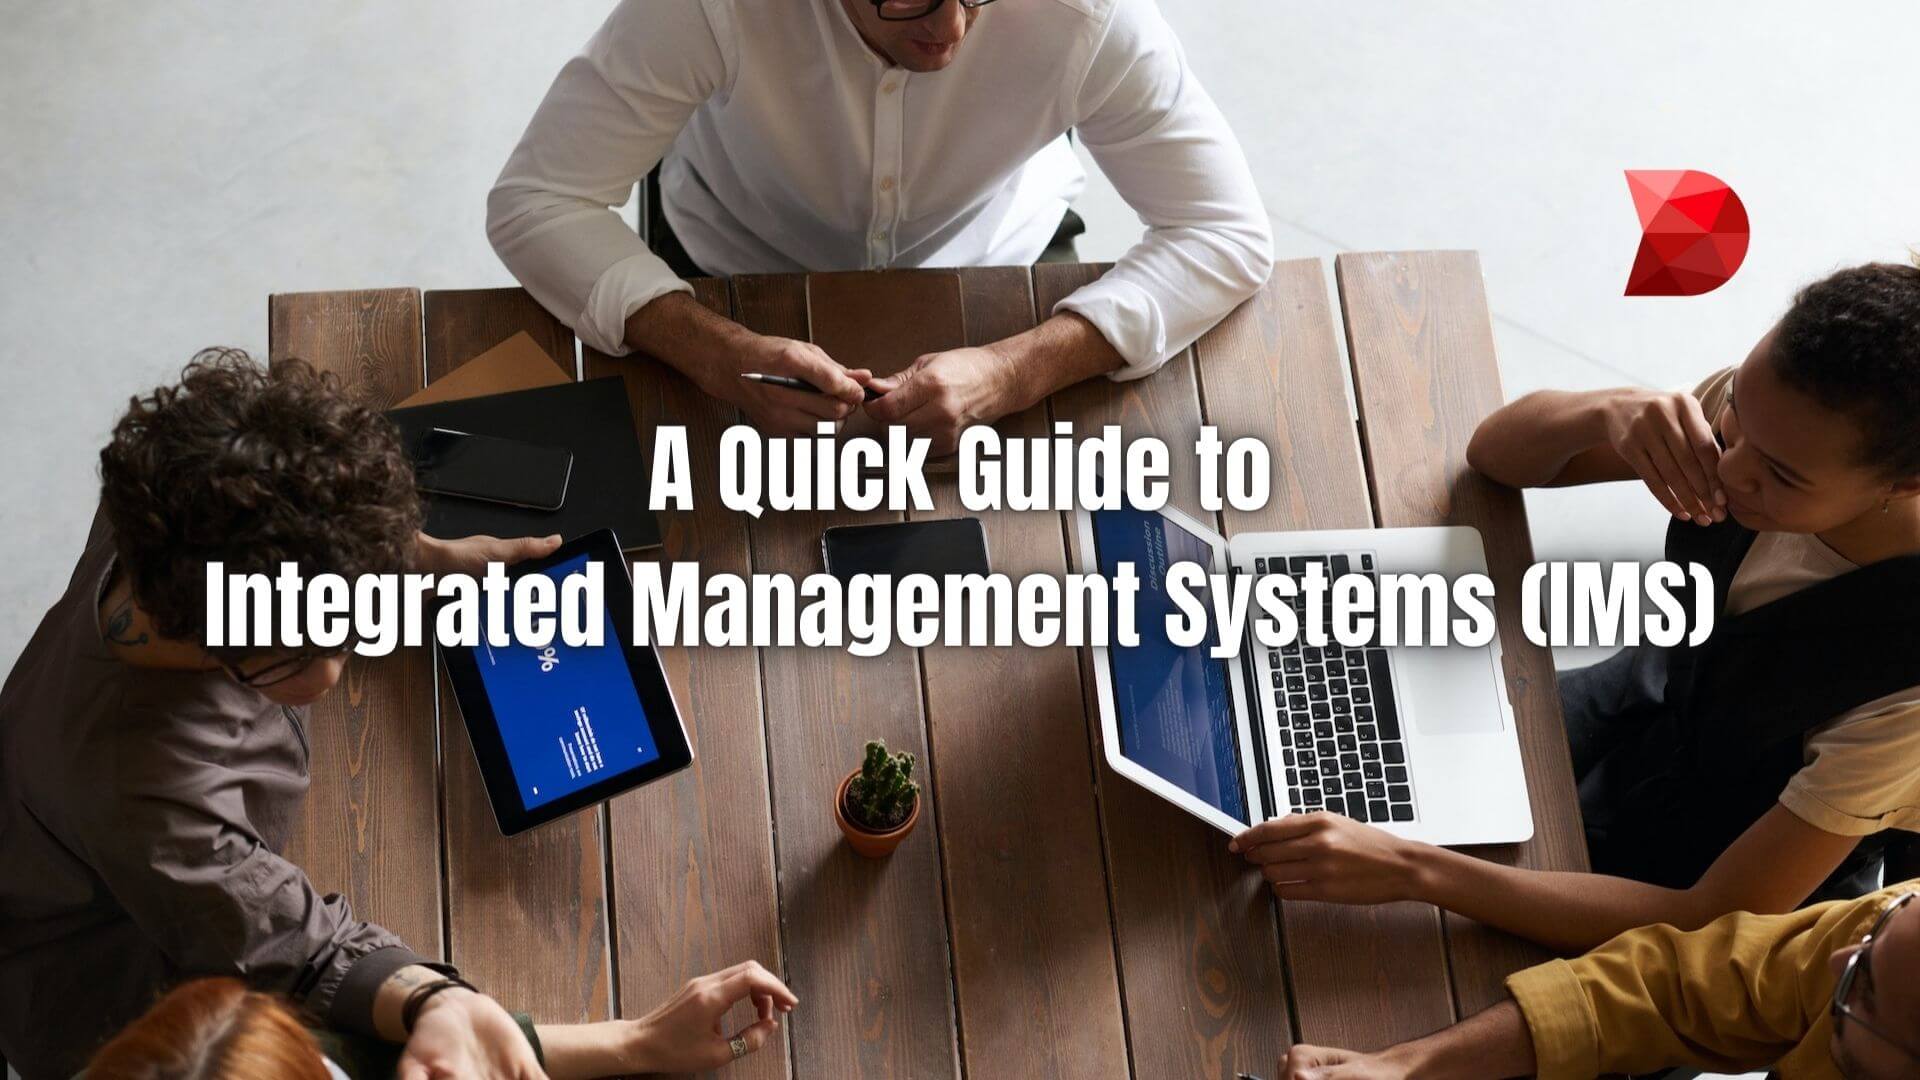 Integrated Management Systems are essential for organizations that want to ensure efficiency and continual improvement. Learn why!